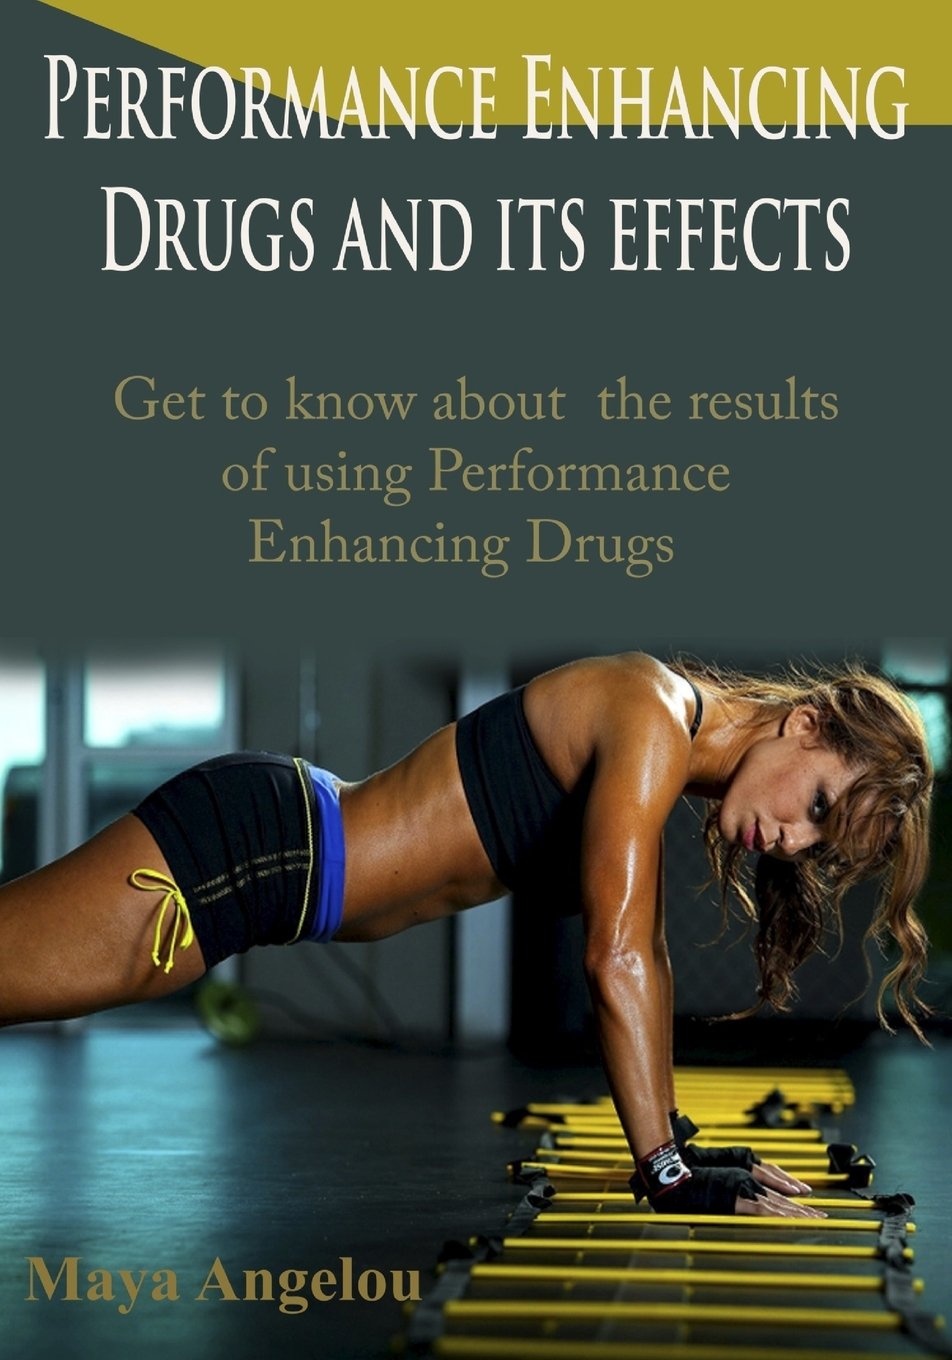 Performance Enhancing Drugs and its effects